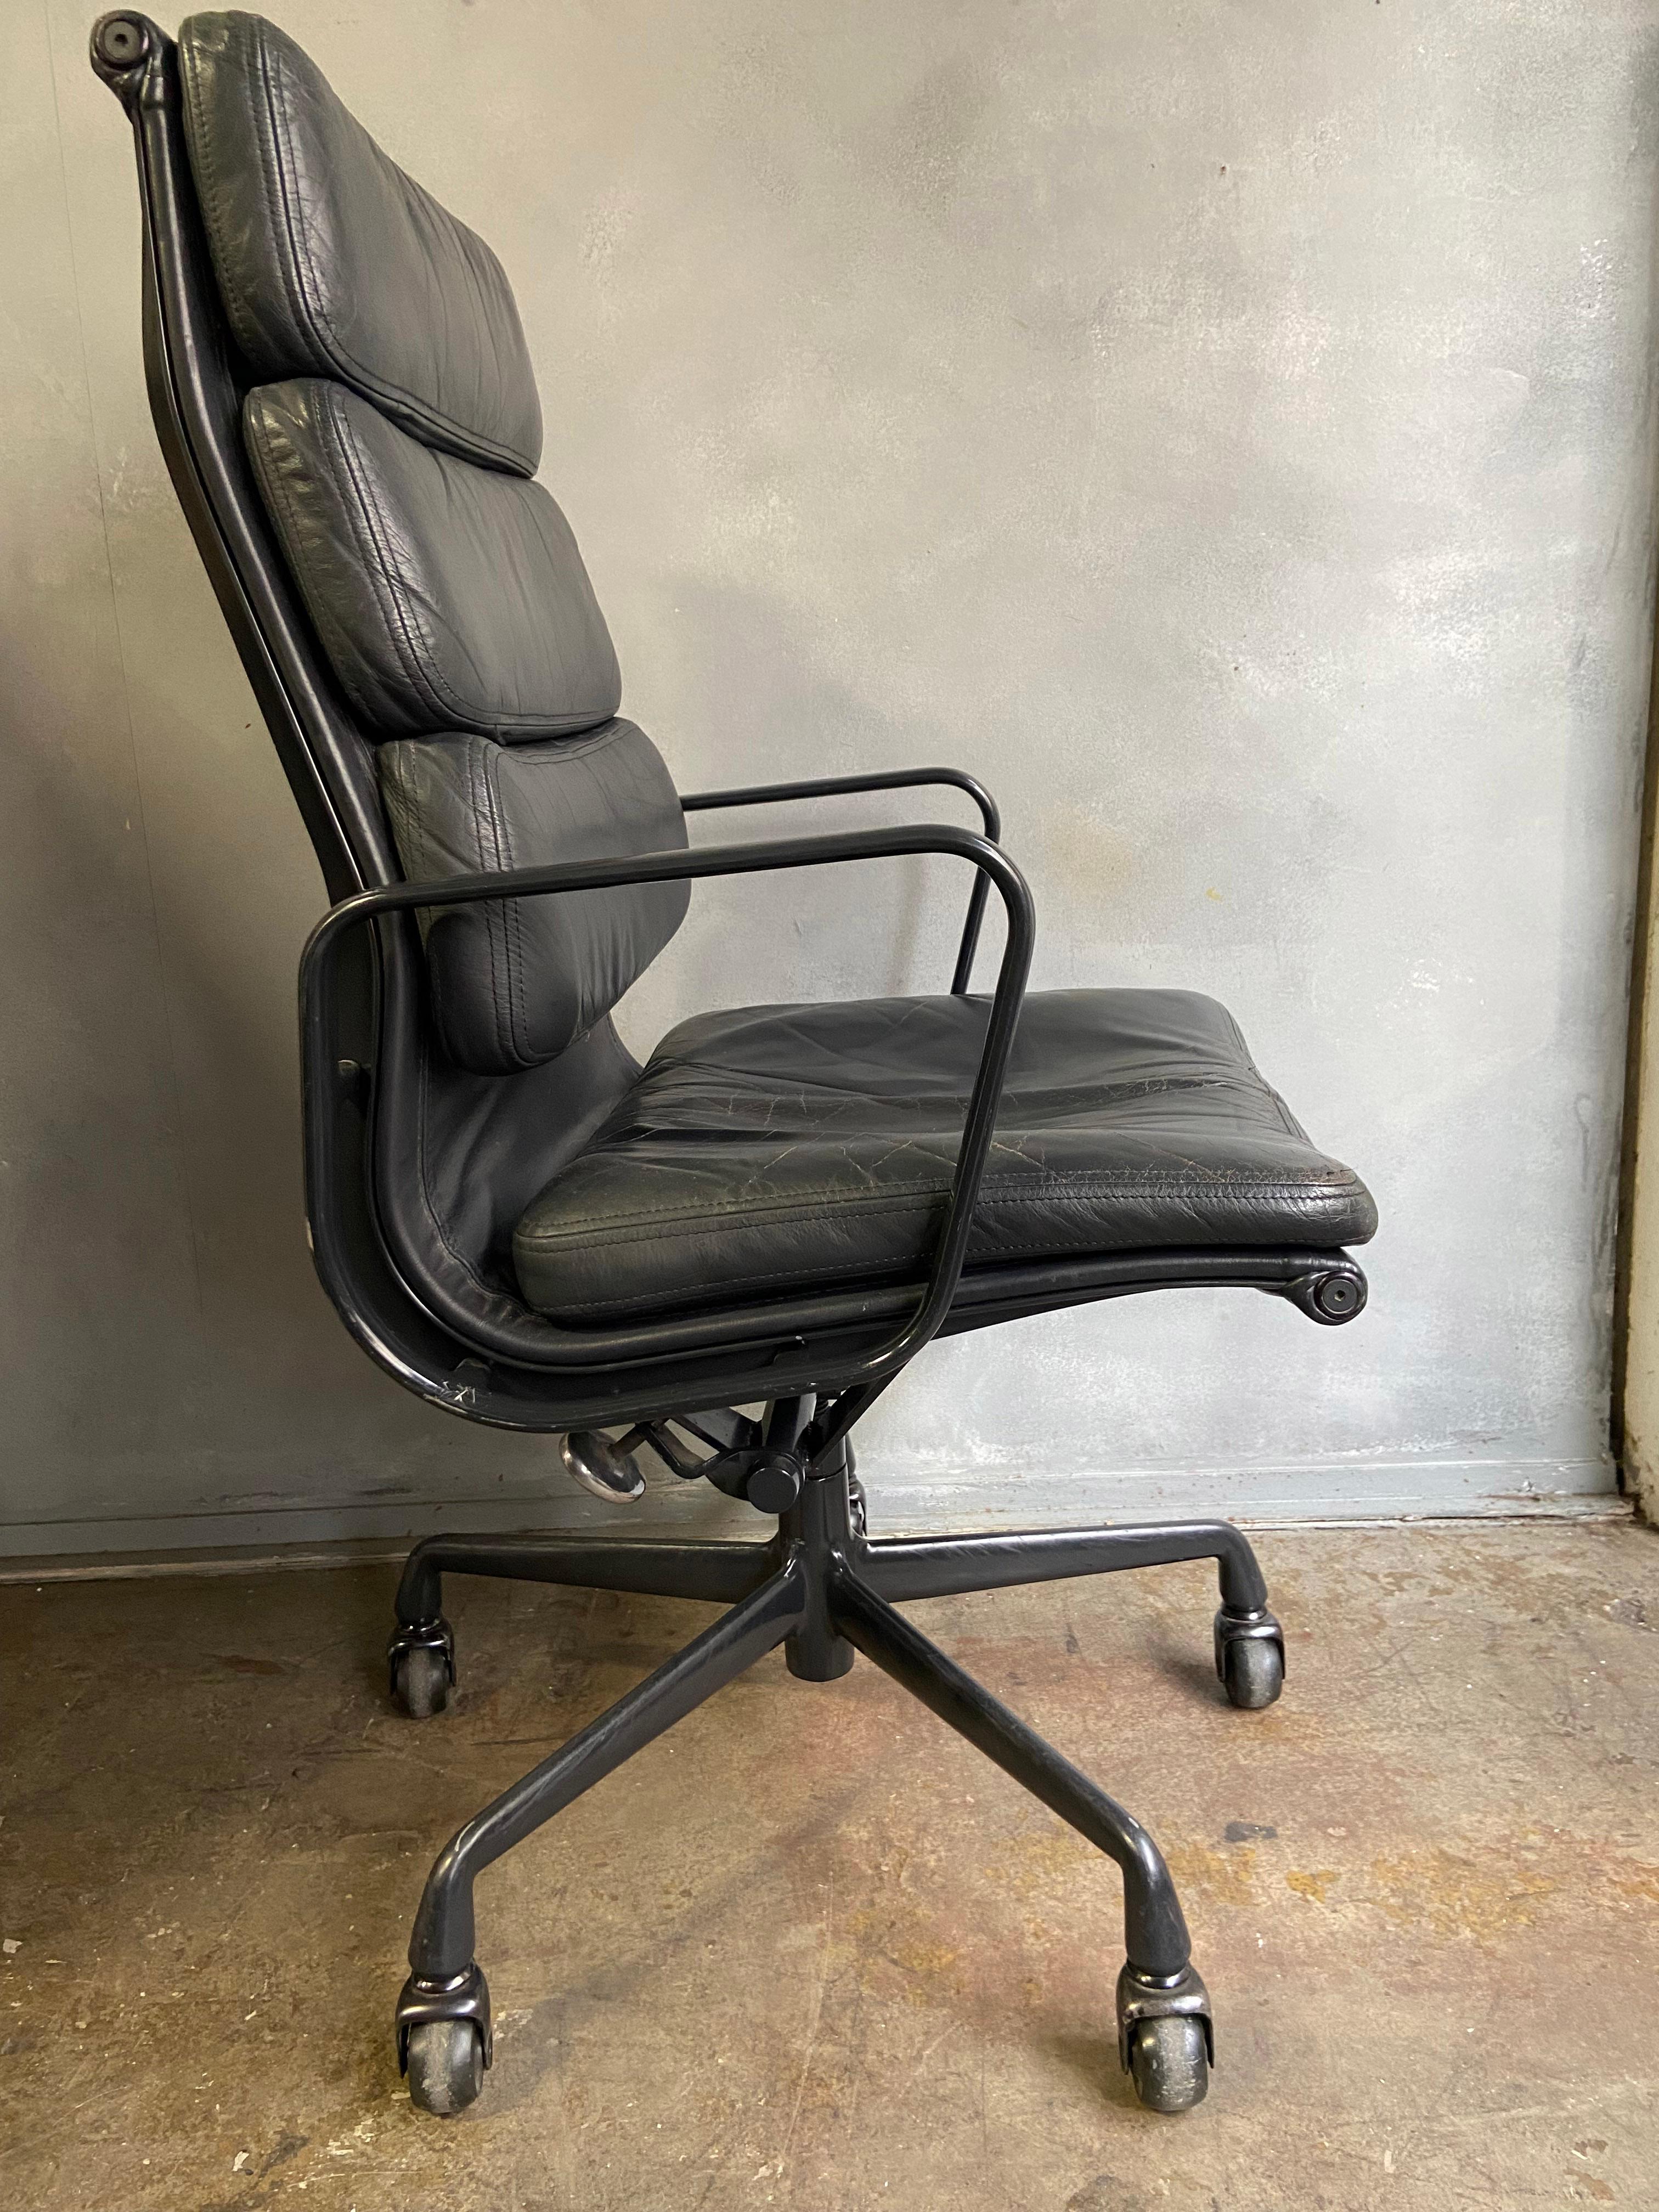 For your consideration is an Eames for Herman Miller vintage soft pad chair ( High Back) in a dark grey / black frame and leather uphostery. This chair is from the 1980's when a lot of experimentation with color frames and leather took place. It has